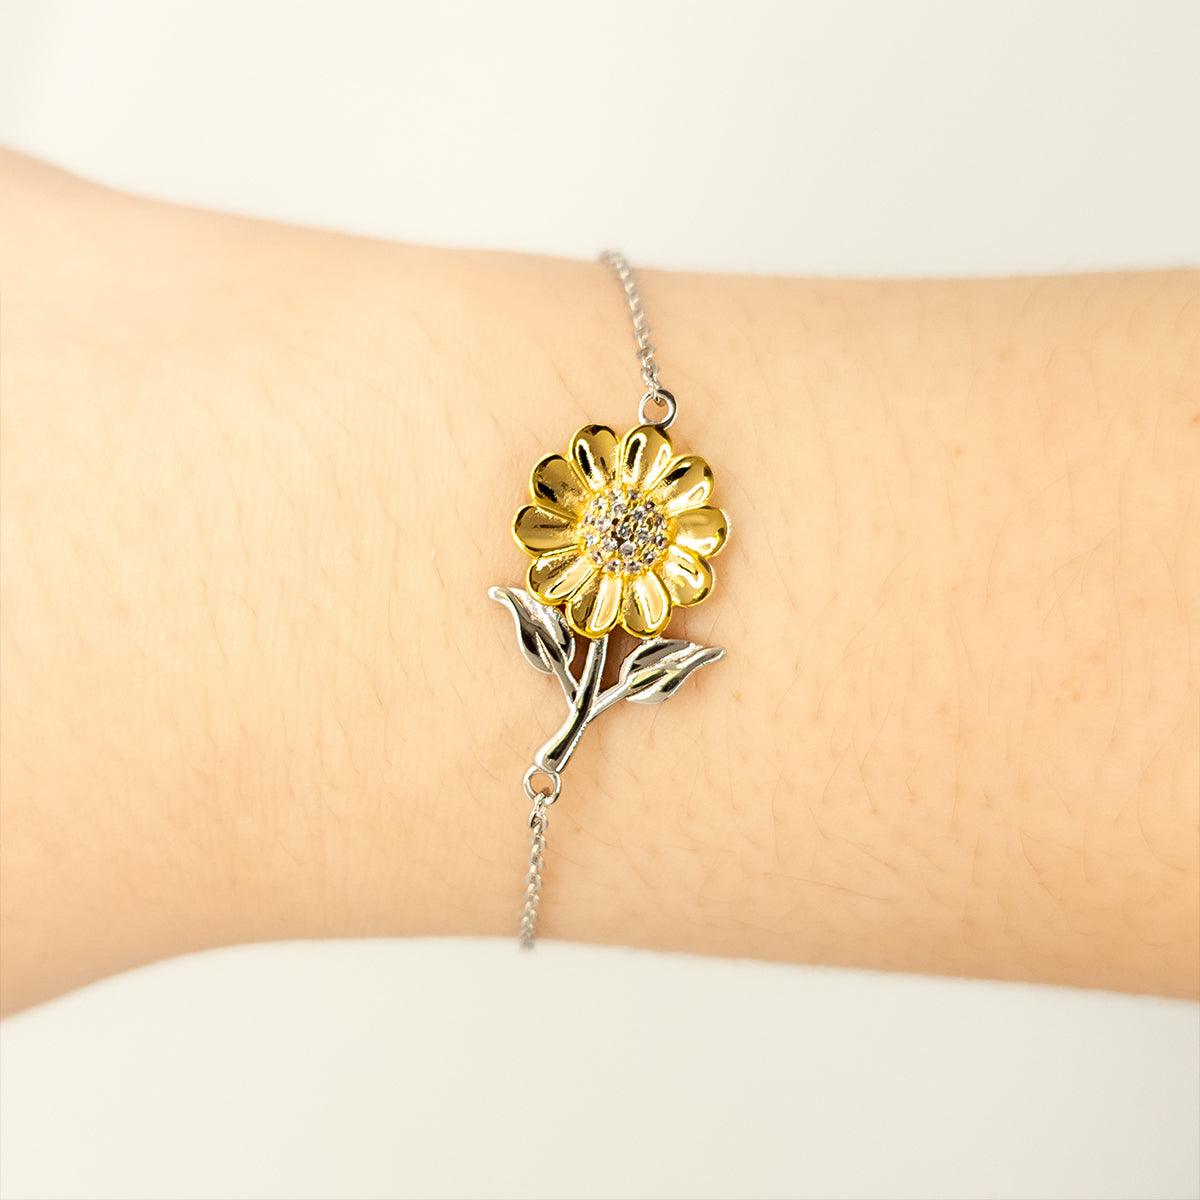 Administrative Assistant Sunflower Bracelet - Thanks for being who you are - Birthday Christmas Jewelry Gifts Coworkers Colleague Boss - Mallard Moon Gift Shop